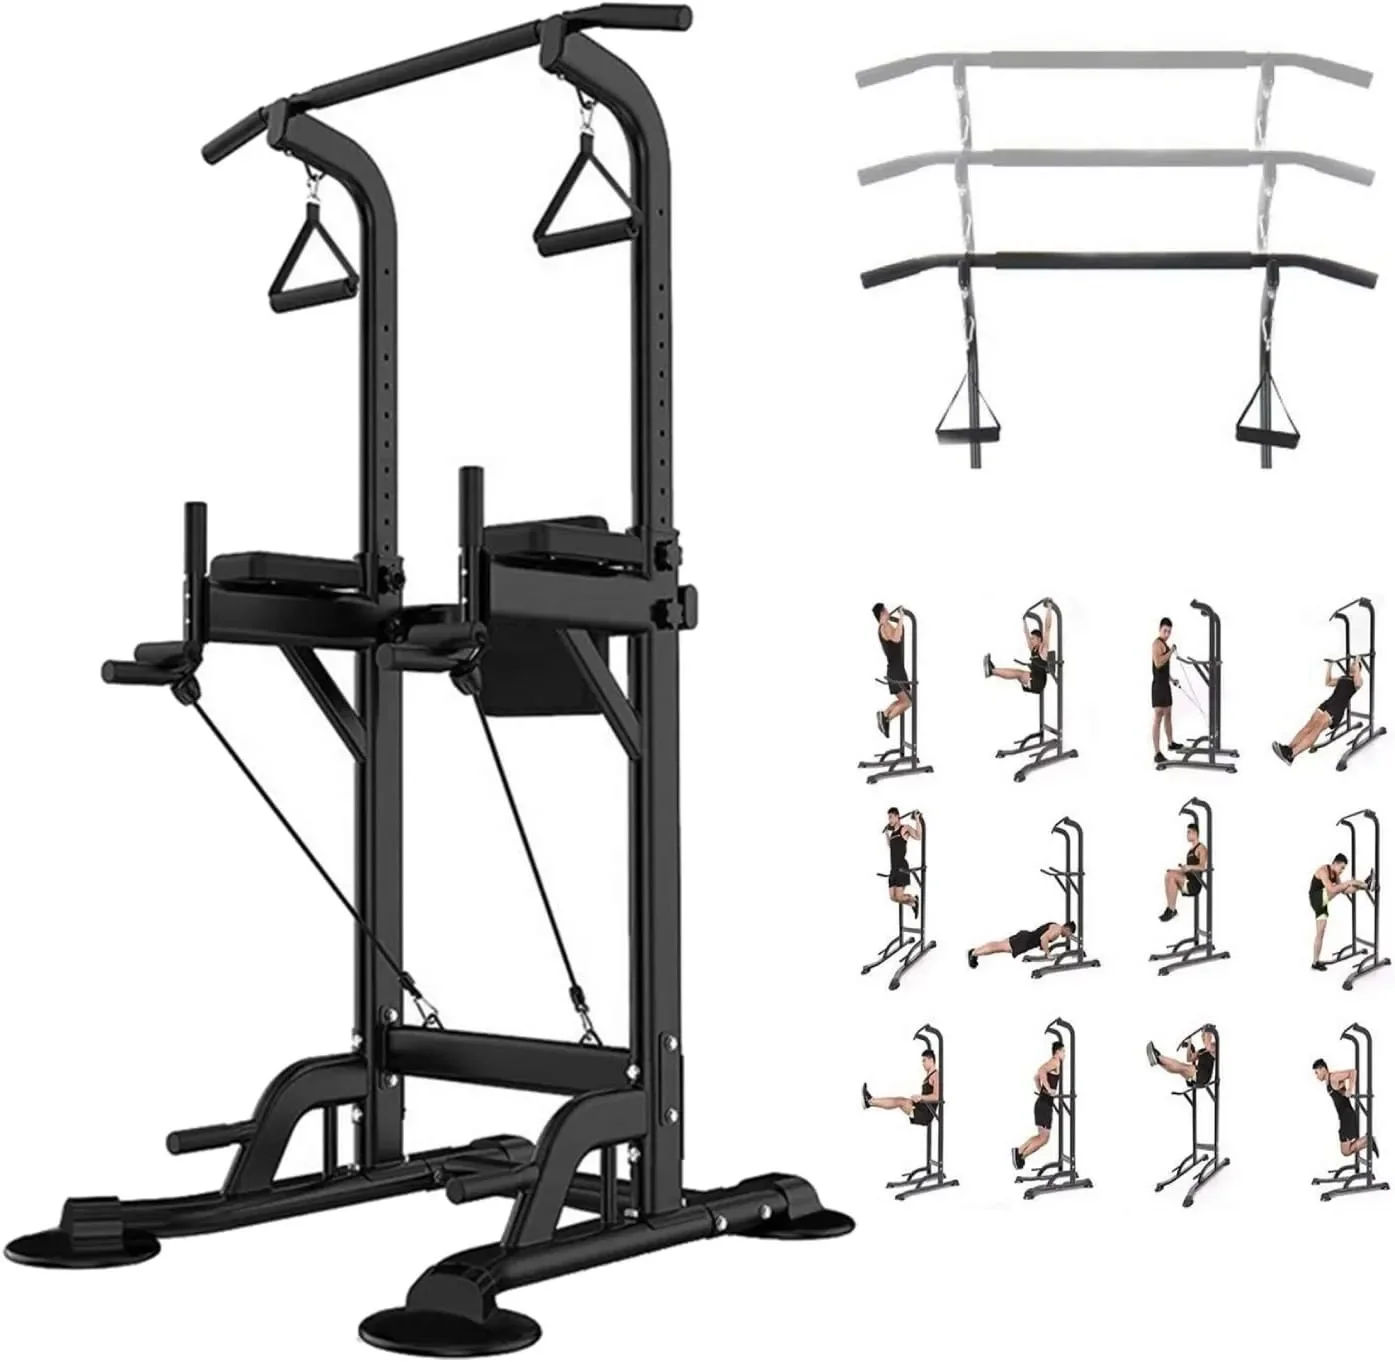 

Tower Dip Bar Station Pull Up Bar Stand for Home Gym Adjustable Strength Training Fitness Equipment 330 LBS with Backrest